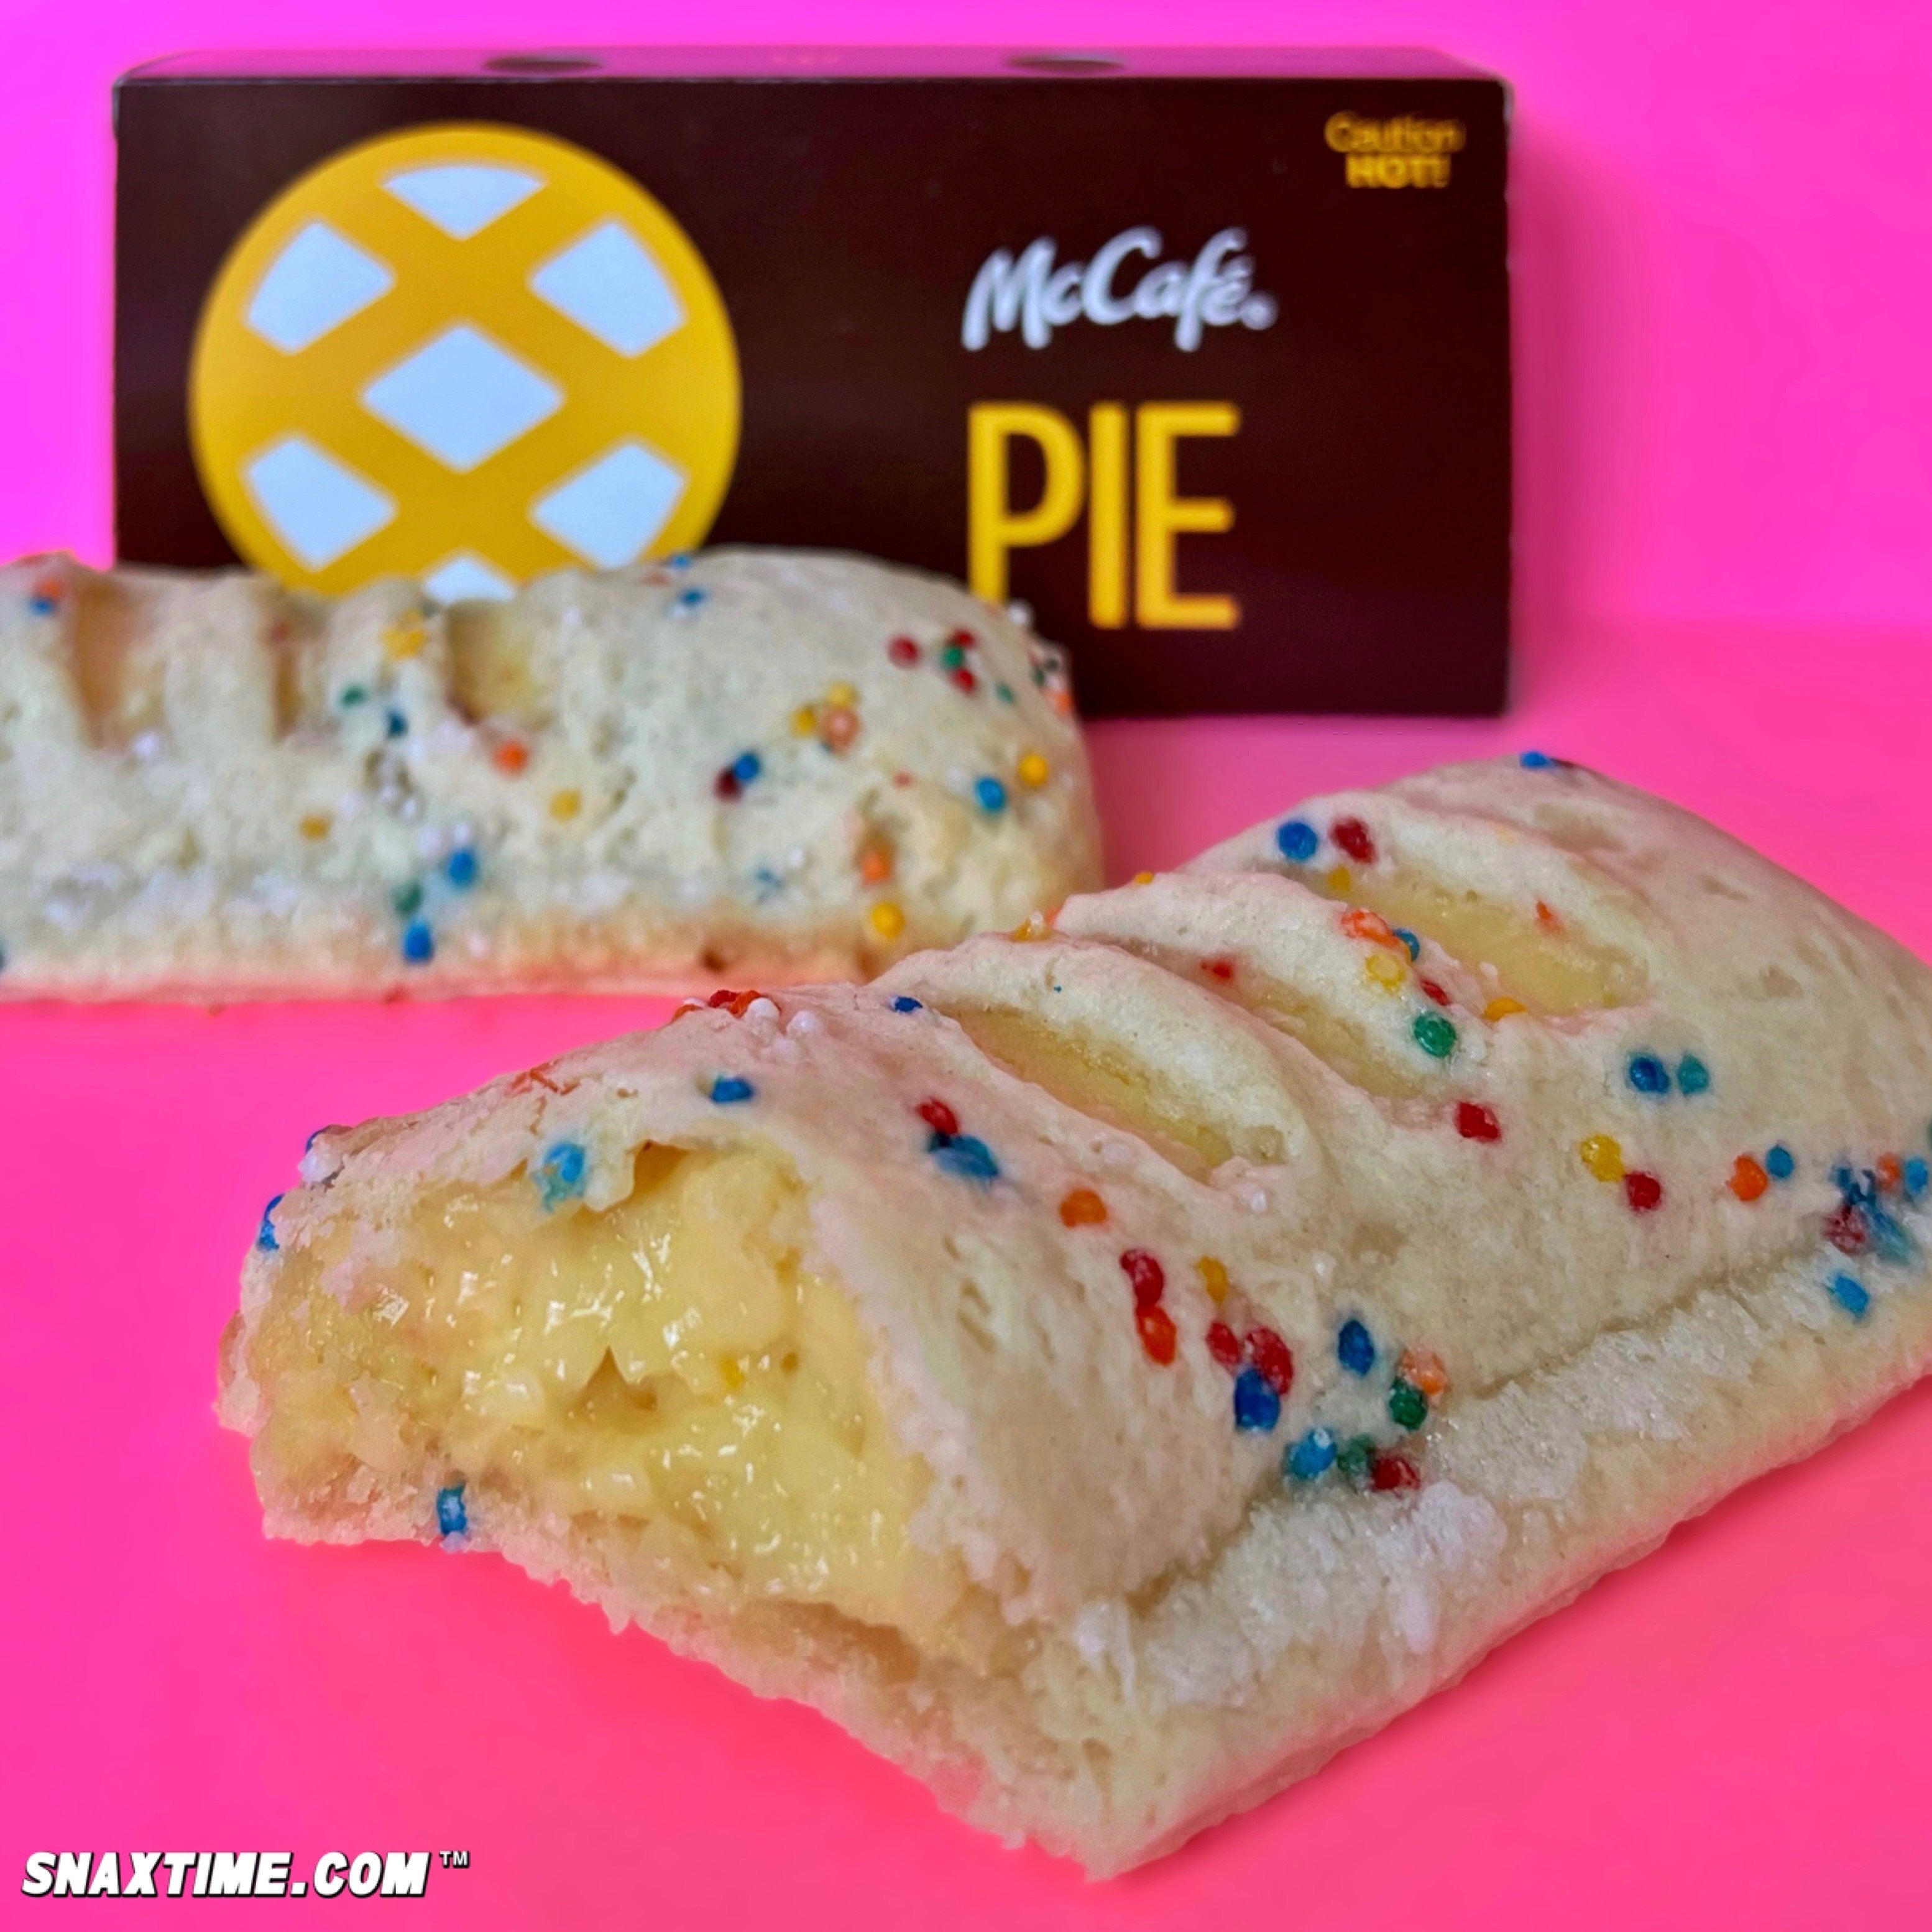 McDonald's Holiday Pie is Back! Snaxtime